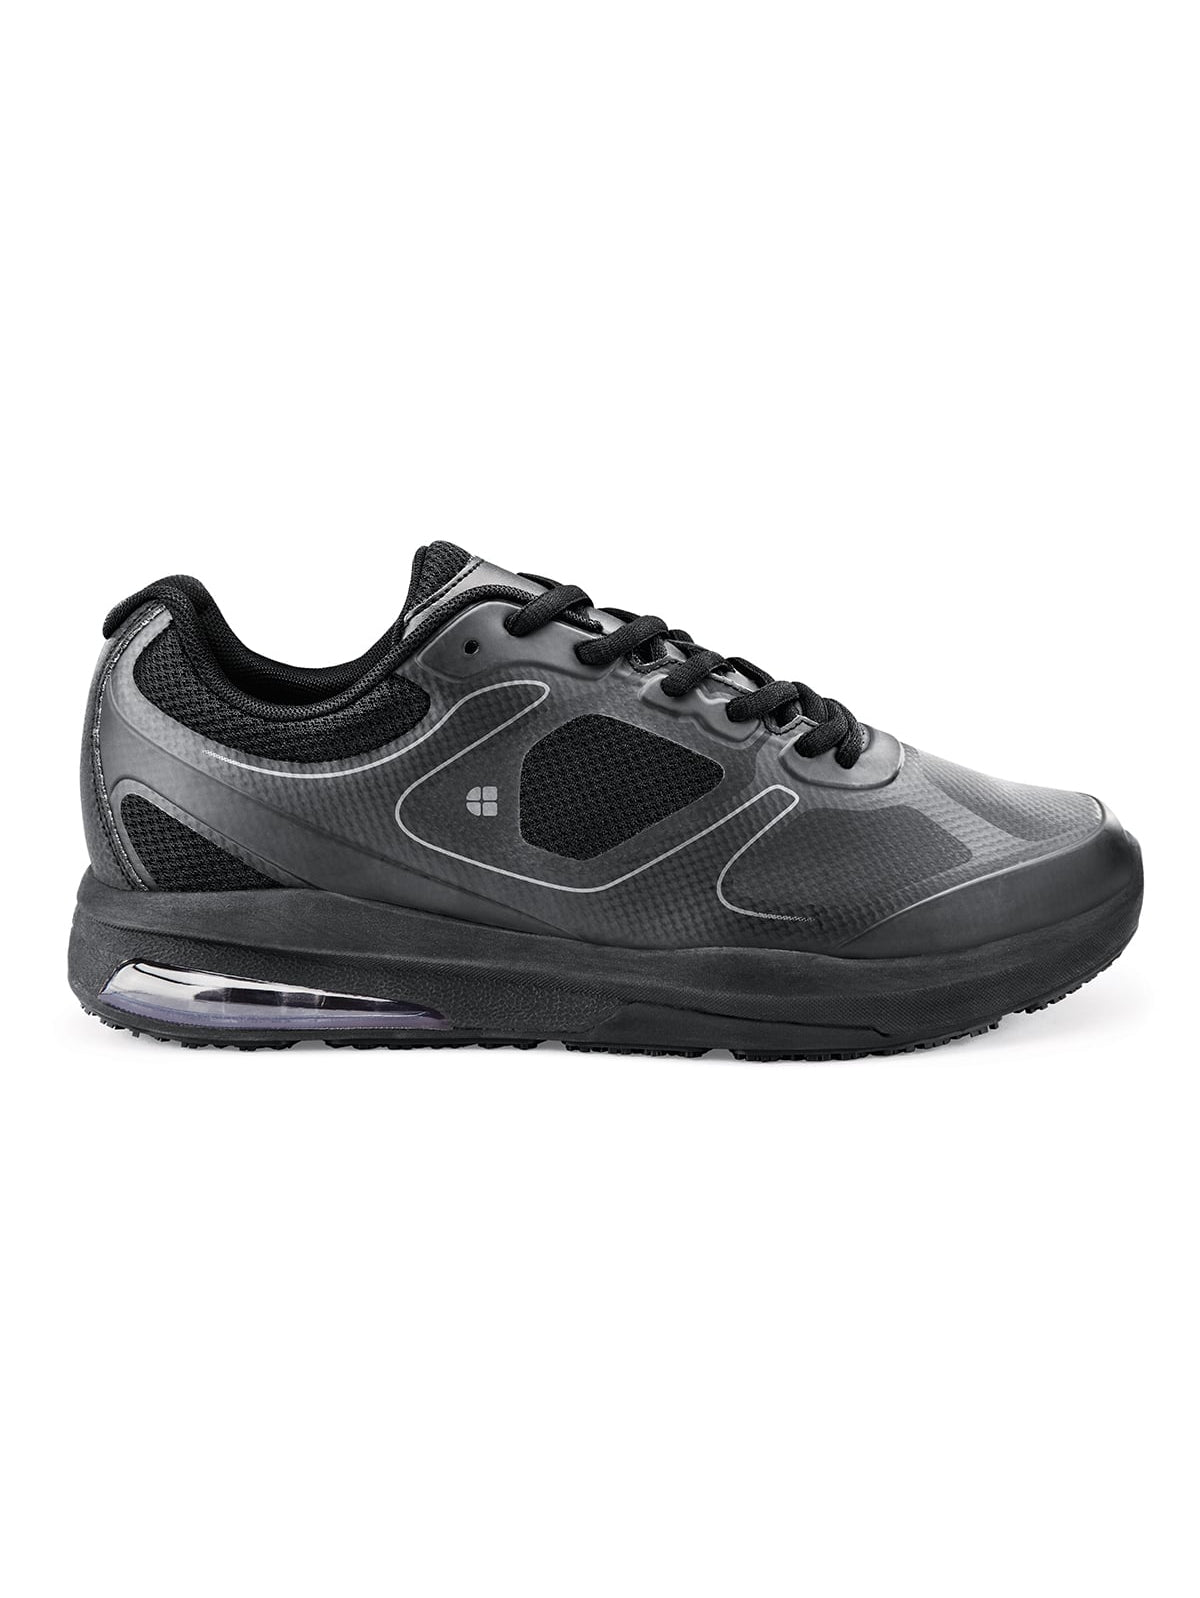 Women's Work Shoe Revolution 2 Black by  Shoes For Crews.